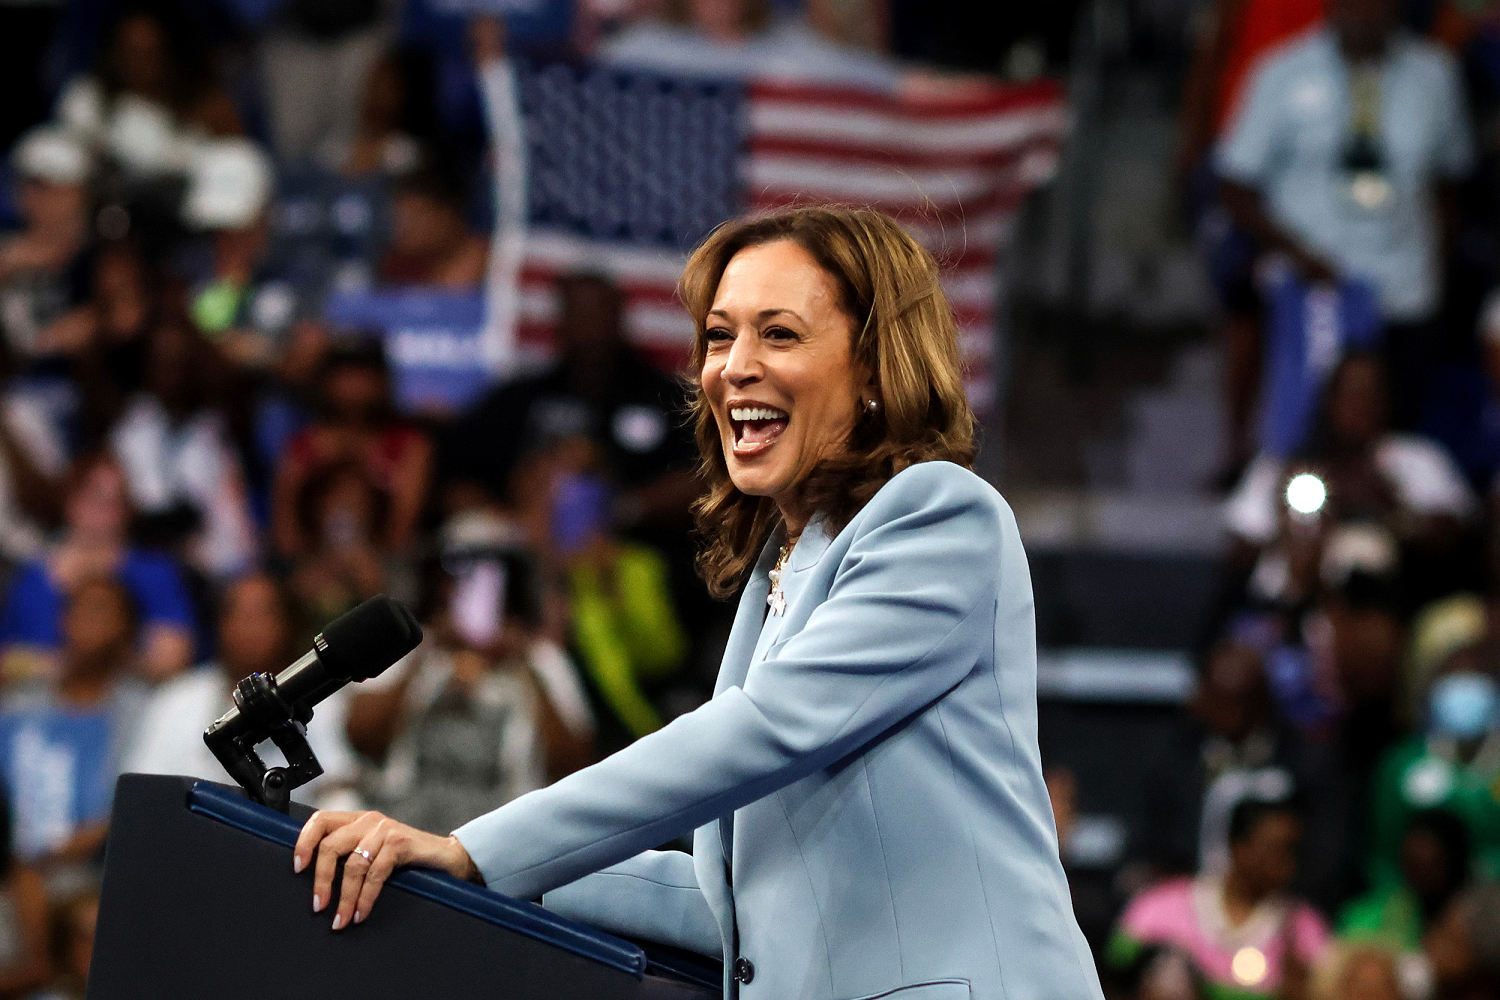 Harris expected to announce her VP pick Tuesday ahead of their Philadelphia rally